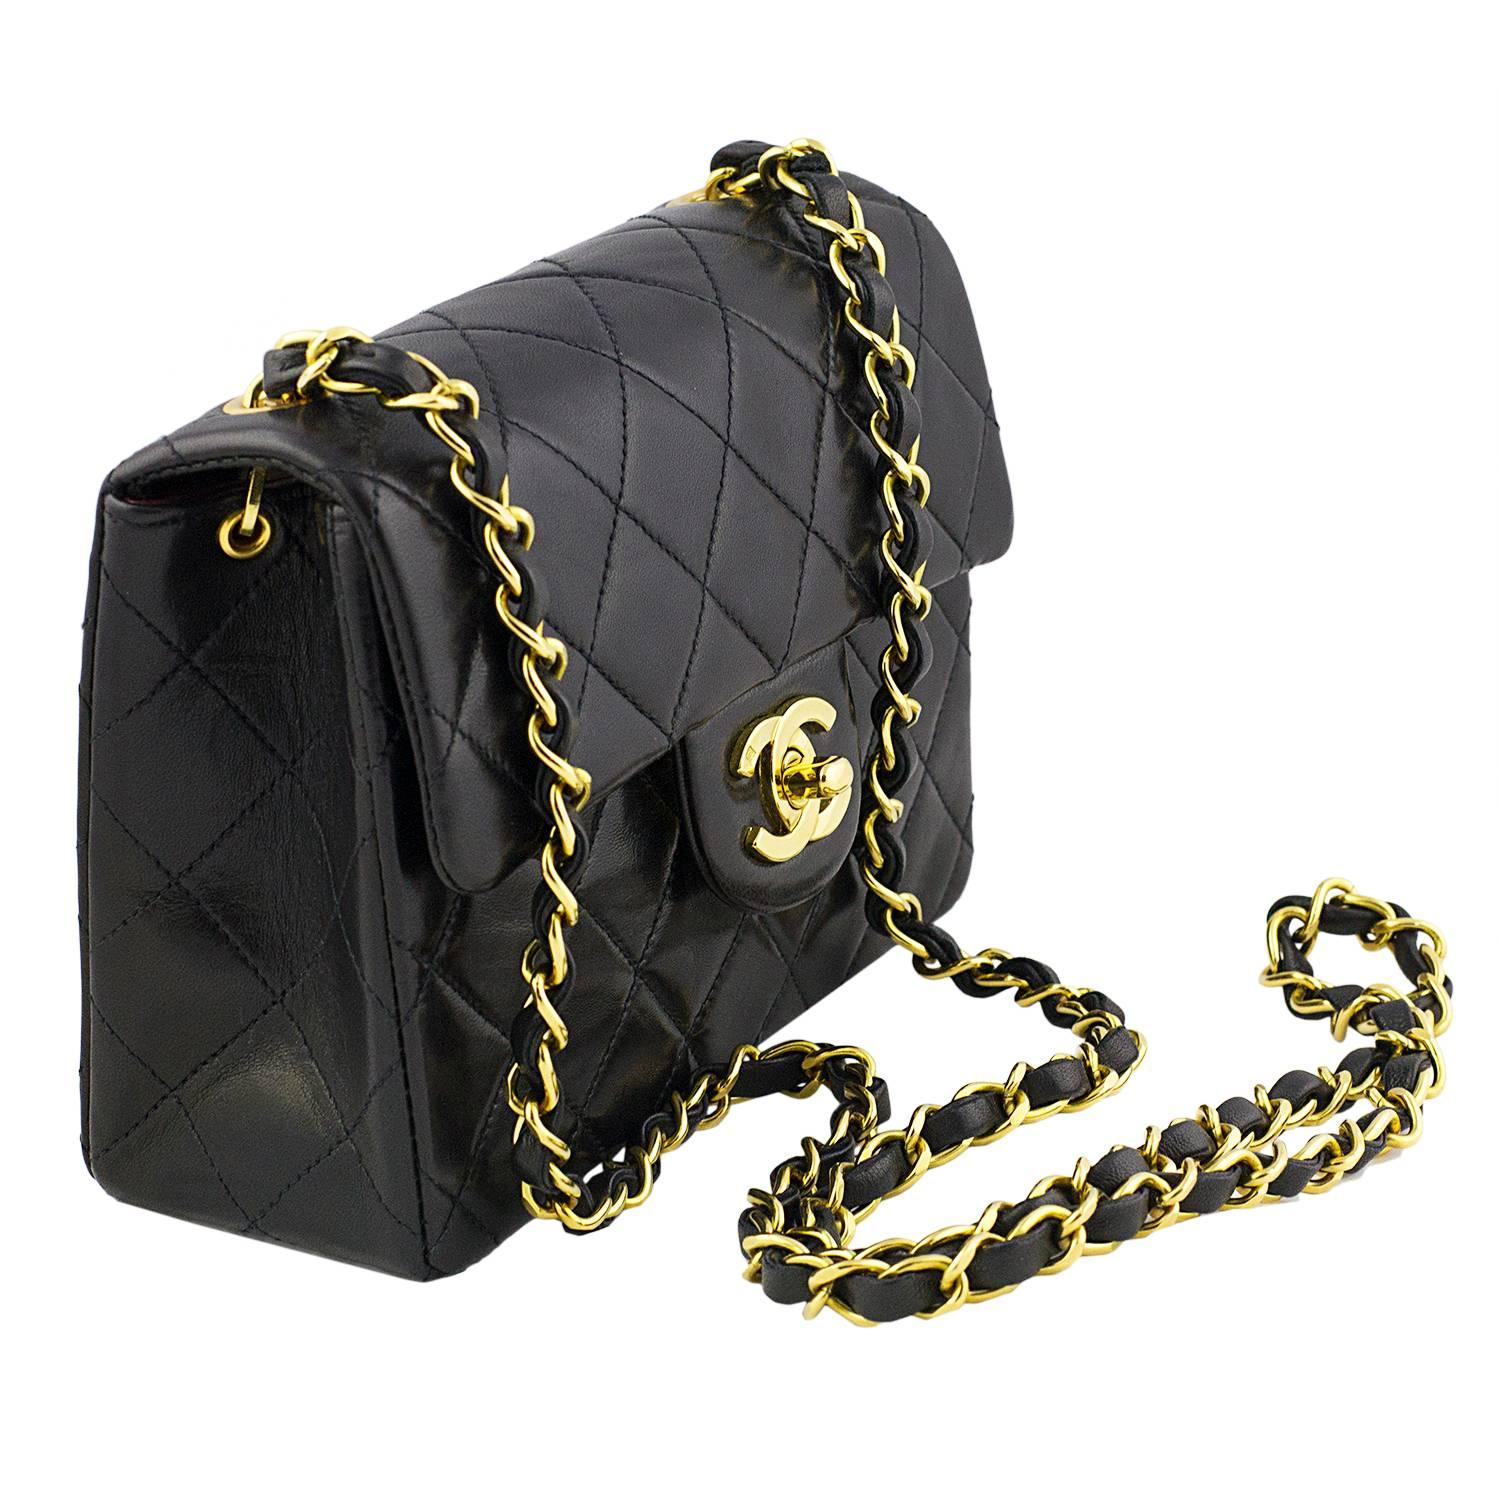 Chanel black lambskin quilted leather mini classic flap bag.
High carat gold plated hardware. 
With serial number in tact and dust bag.
Made in France in 1991